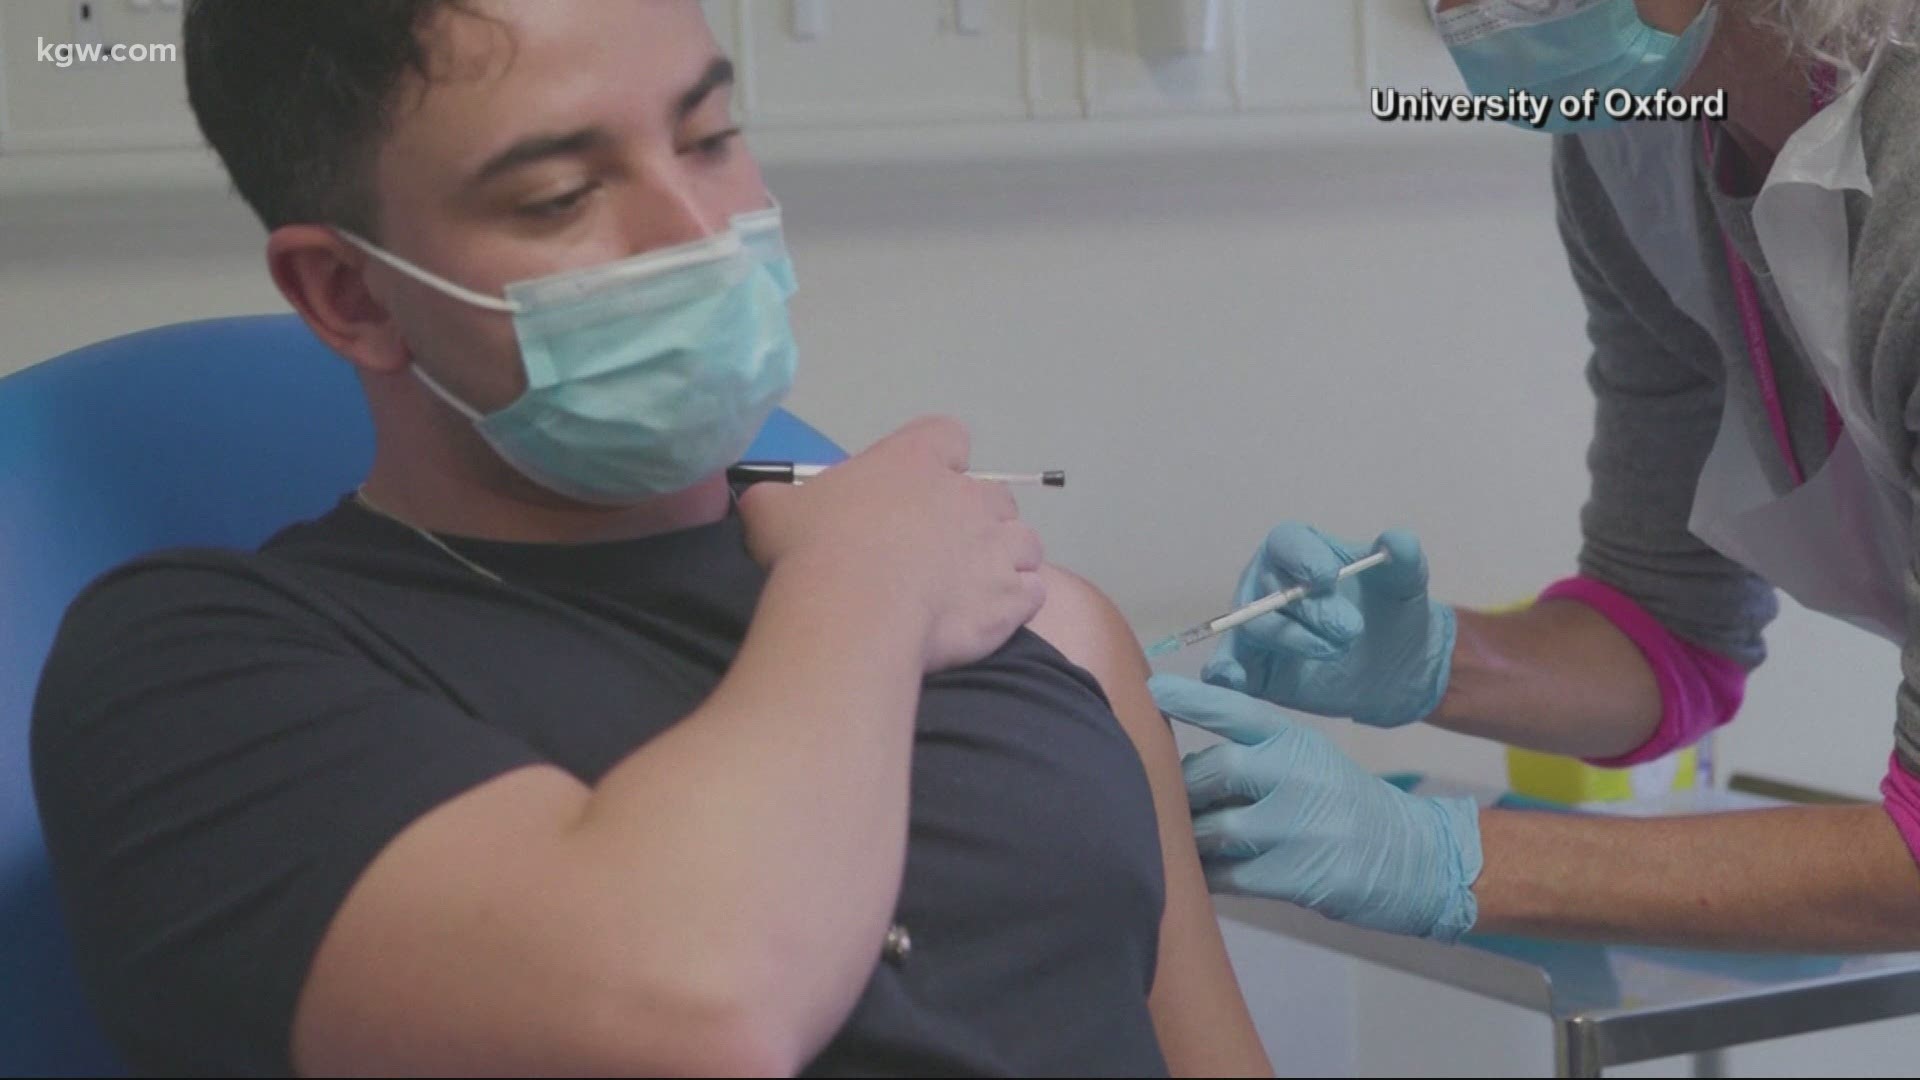 Employers do have the right to mandate vaccinations, but Oregonians may seek medical, religious or philosophical exemptions.